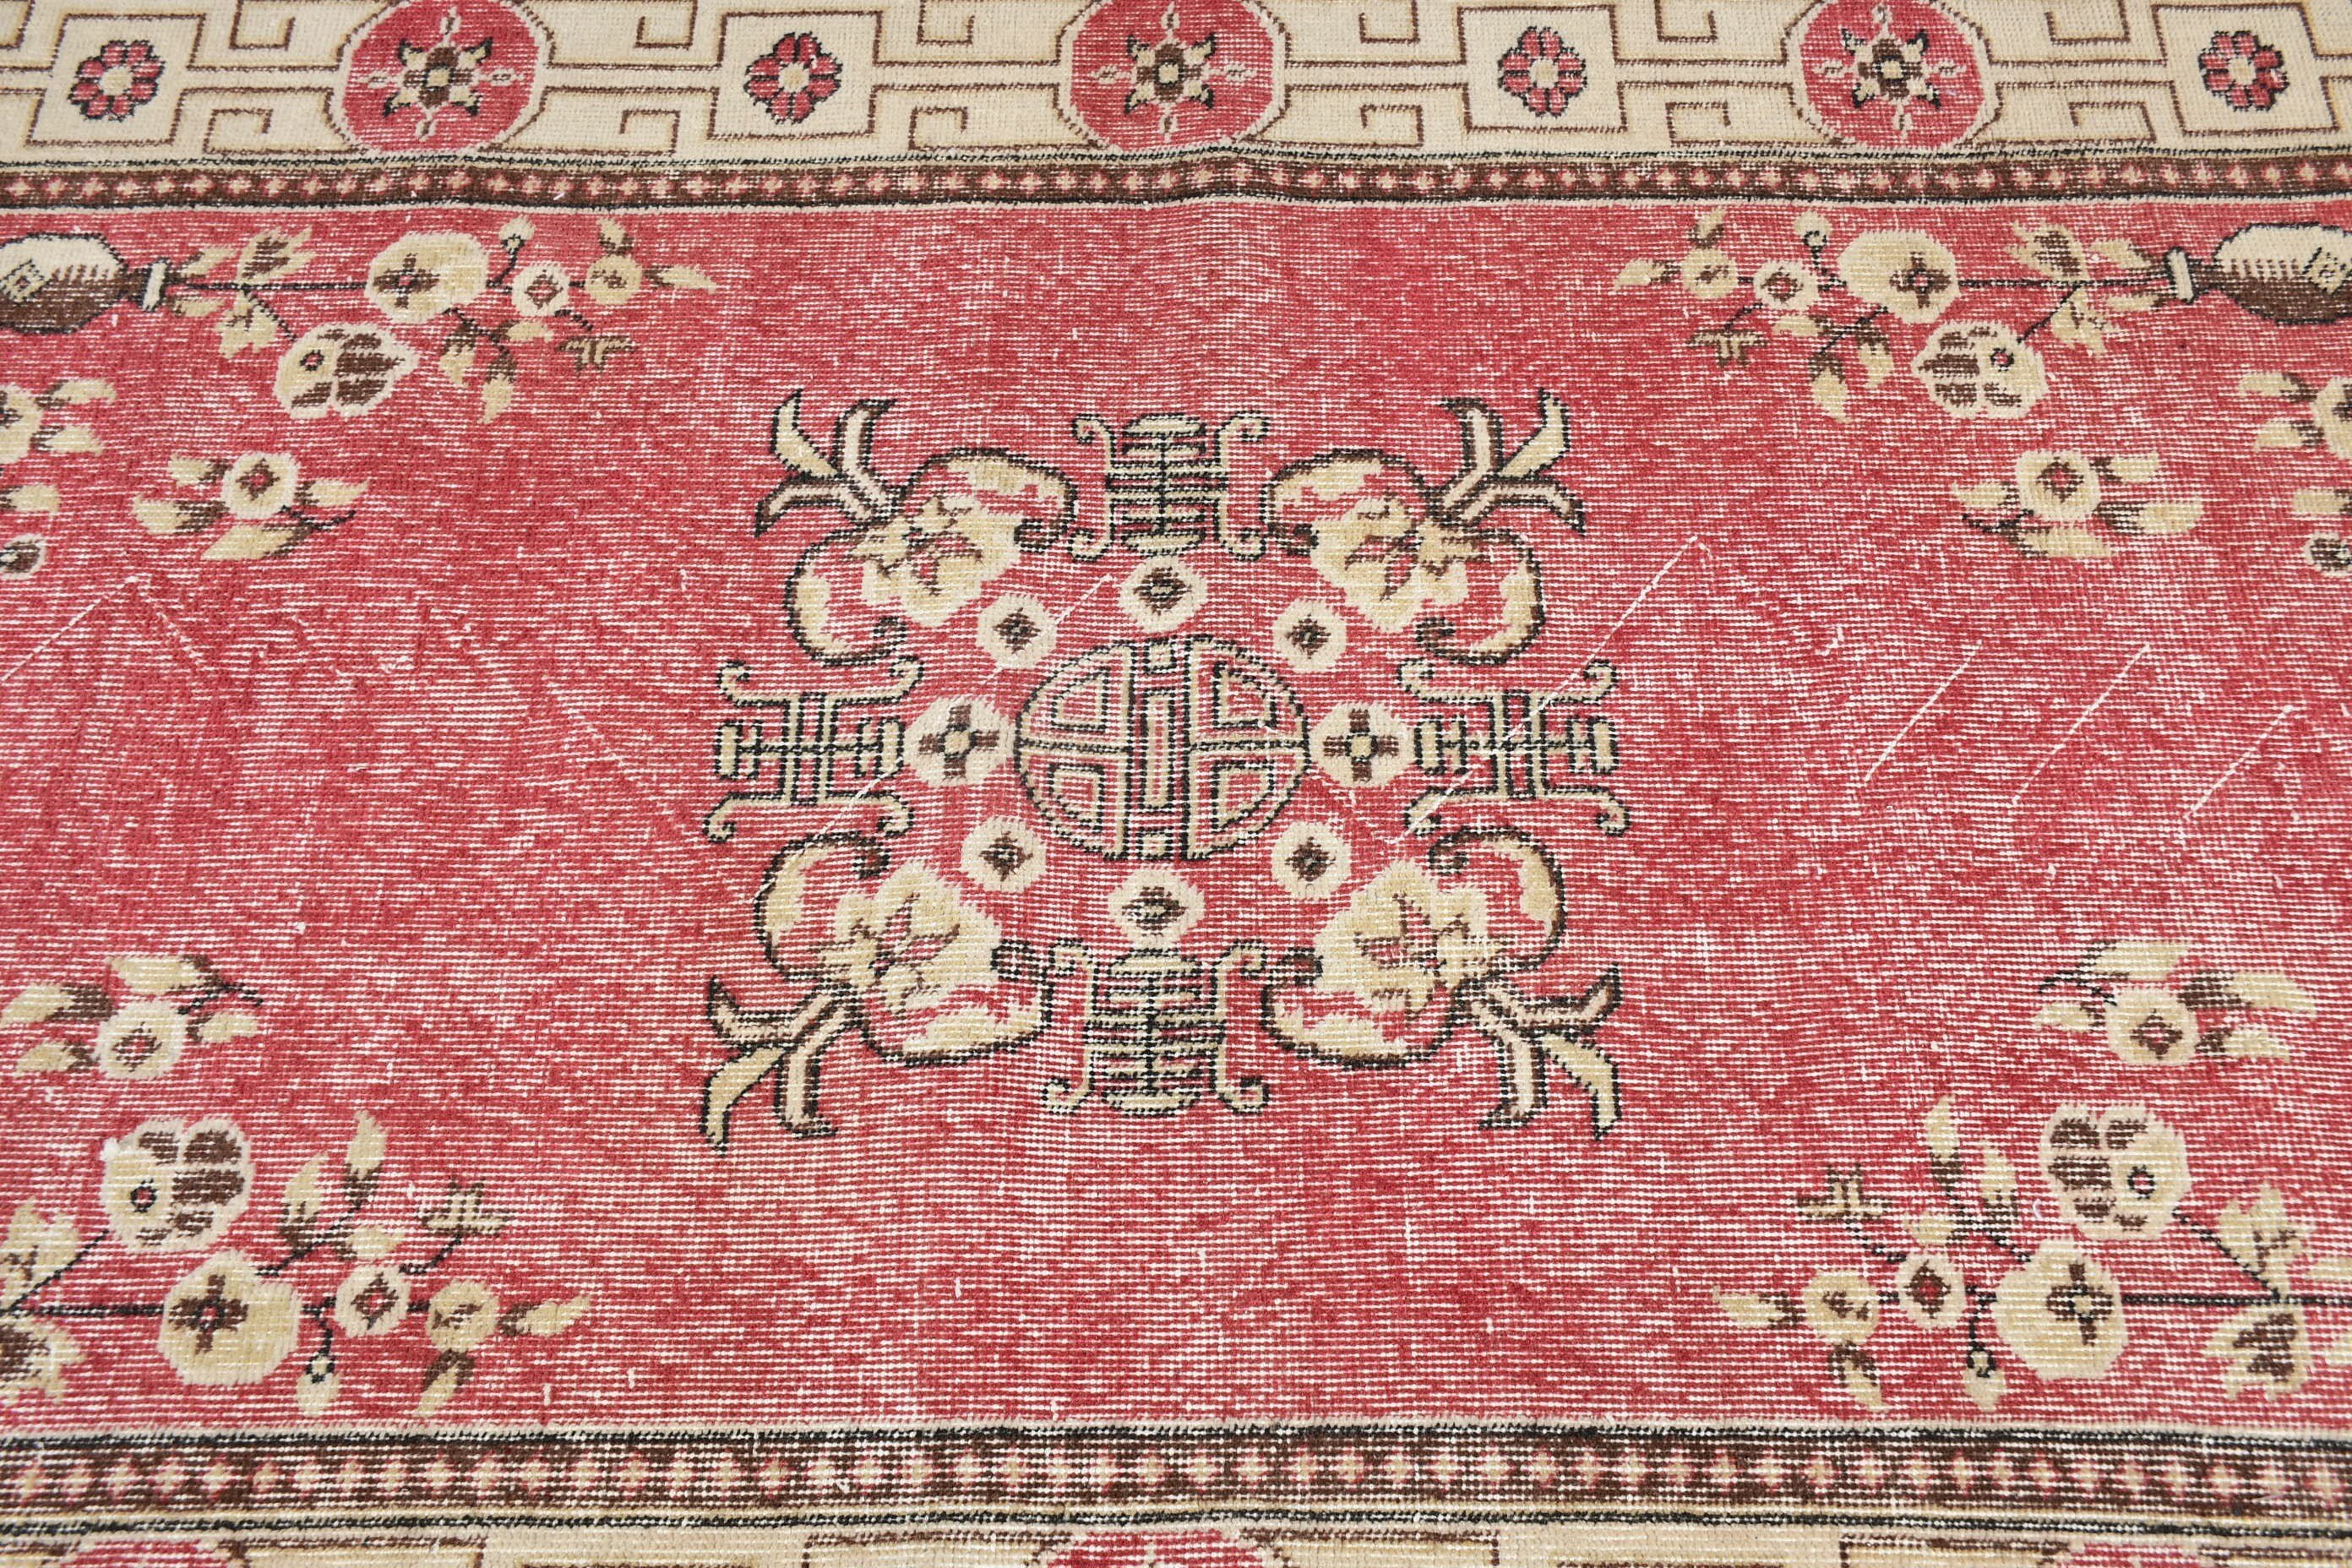 Pink Kitchen Rugs, Nursery Rugs, Anatolian Rug, Entry Rugs, 3.6x6.4 ft Accent Rug, Turkish Rugs, Vintage Rug, Rugs for Entry